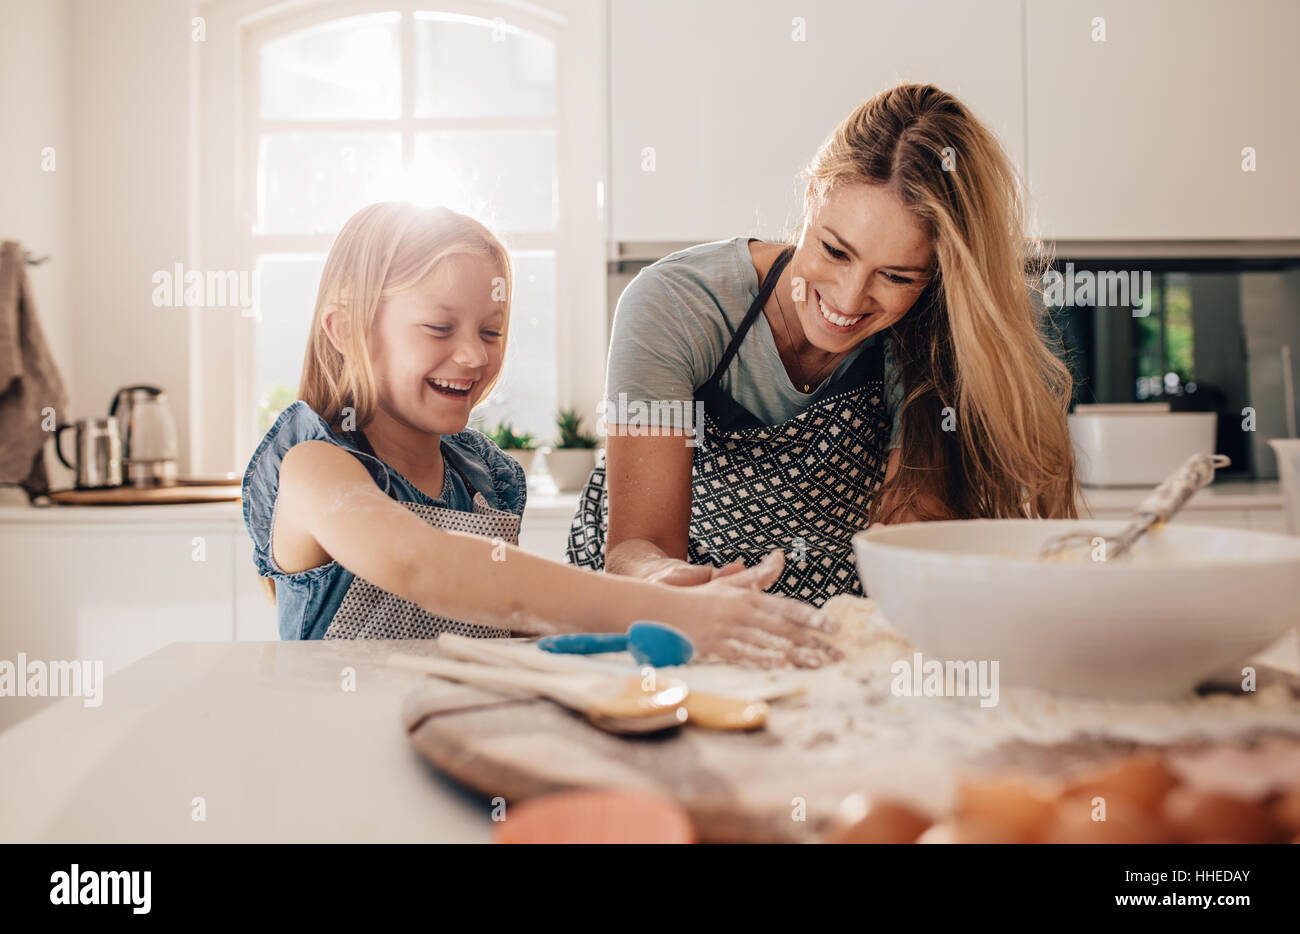 Happy young girl with her mother making dough. Mother and daughter baking in kitchen. Stock Photo